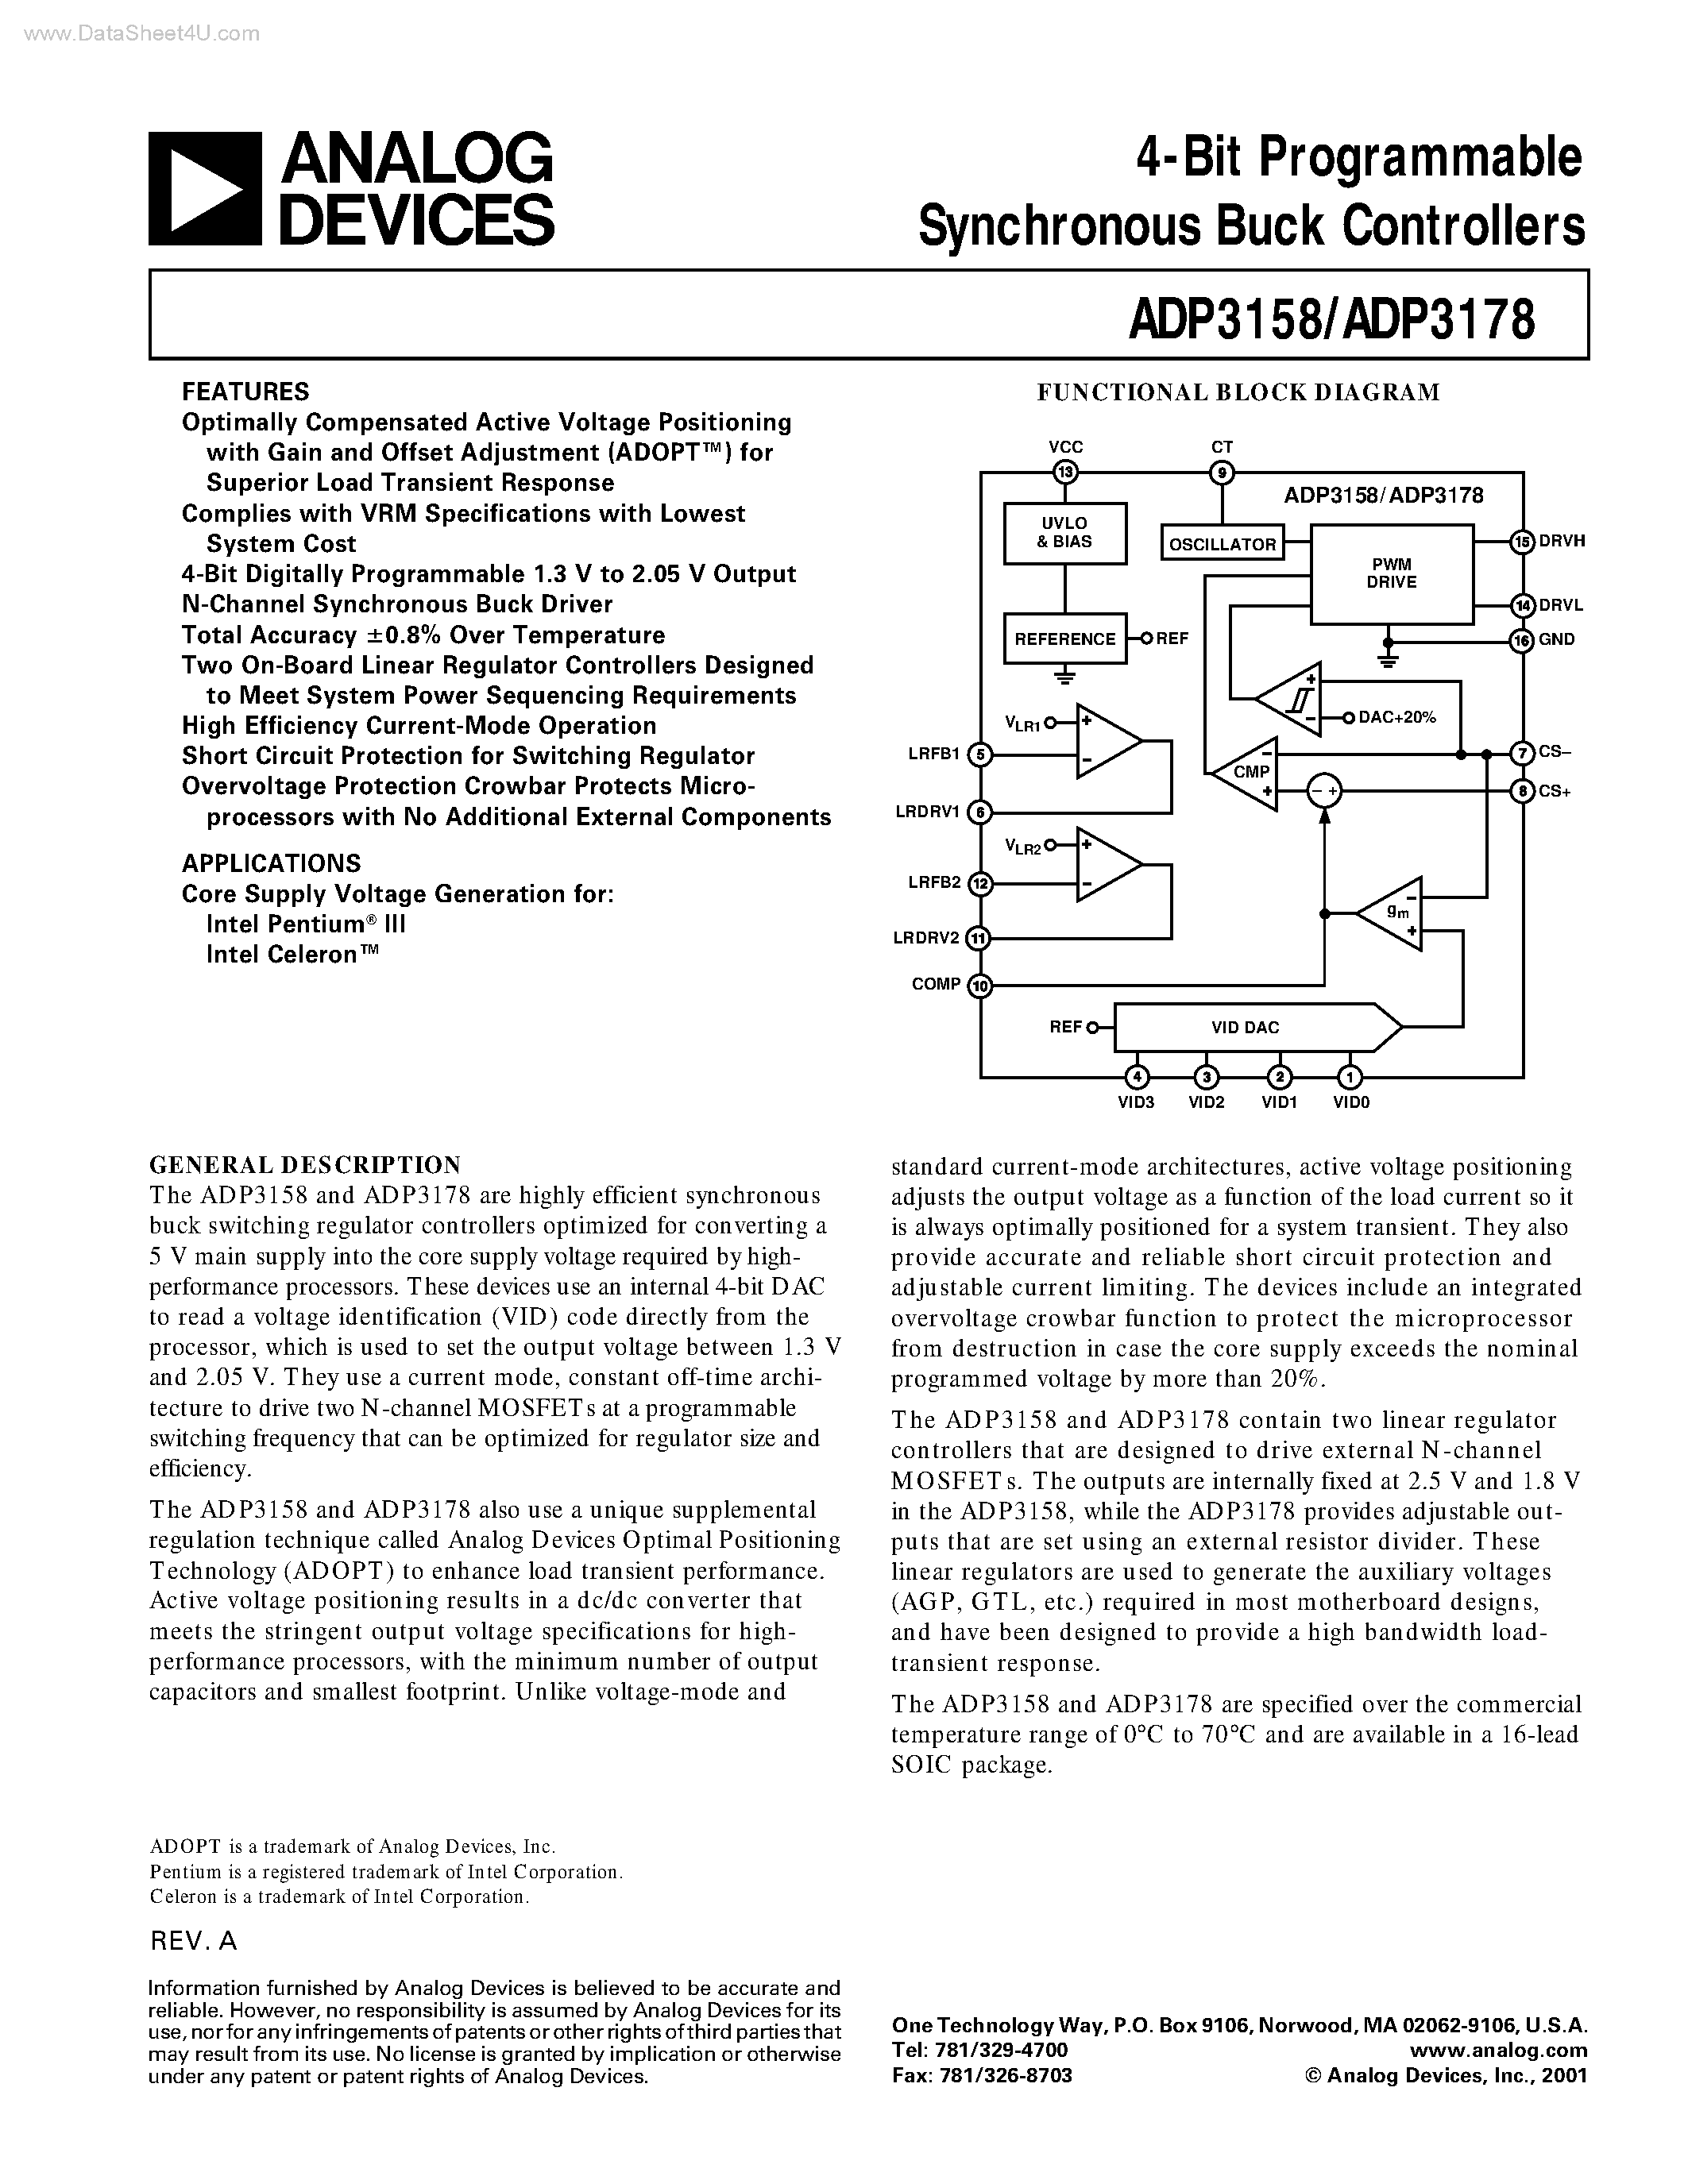 Даташит ADP3158 - (ADP3158 / ADP3178) 4-Bit Programmable Synchronous Buck Controllers страница 1